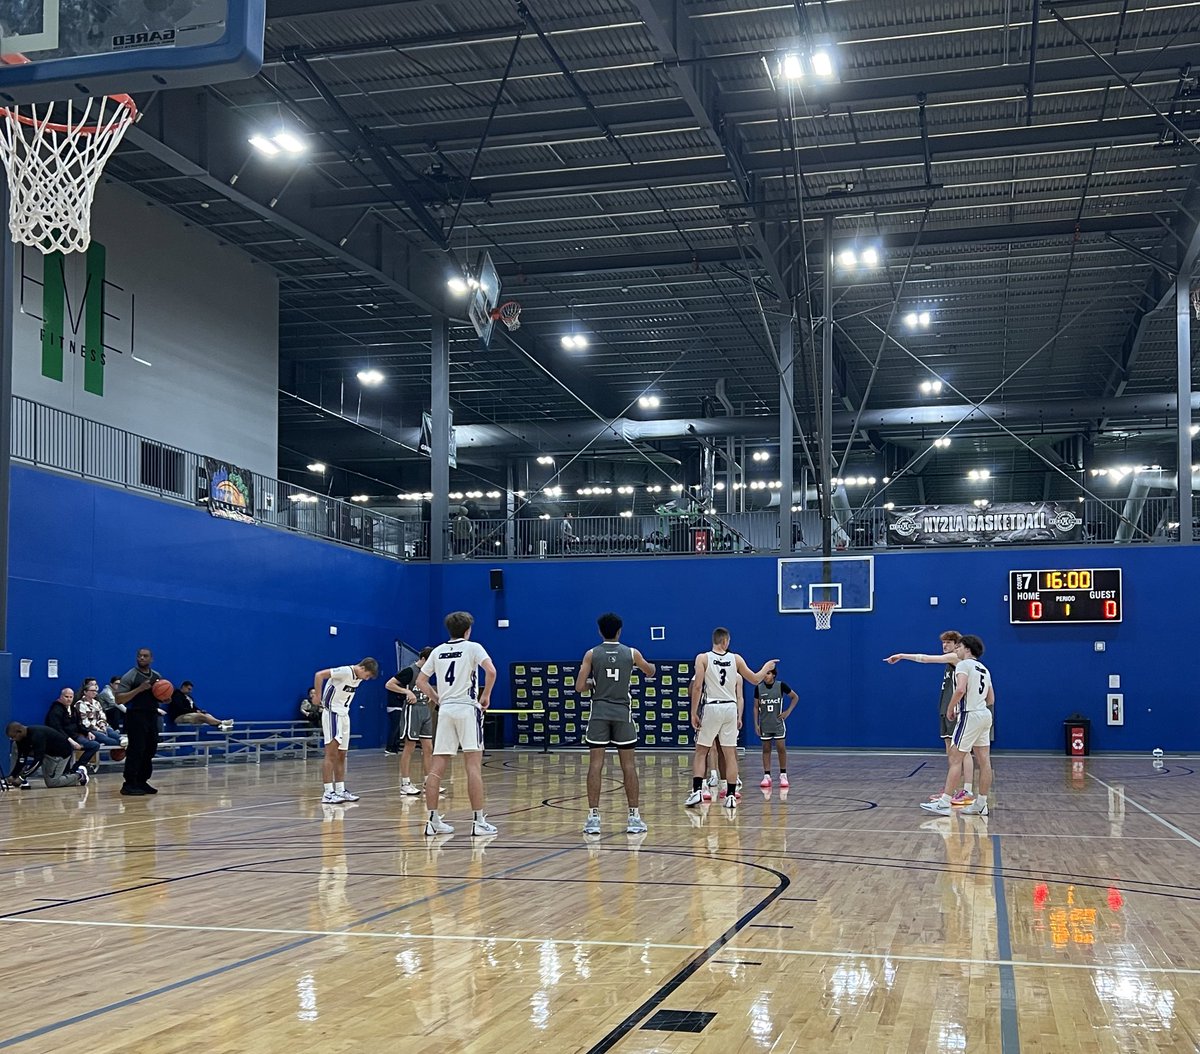 Starting the weekend with a 15U matchup between @WICrusaders and @IllinoisAttack 👀 @ny2lasports @ny2labasketball